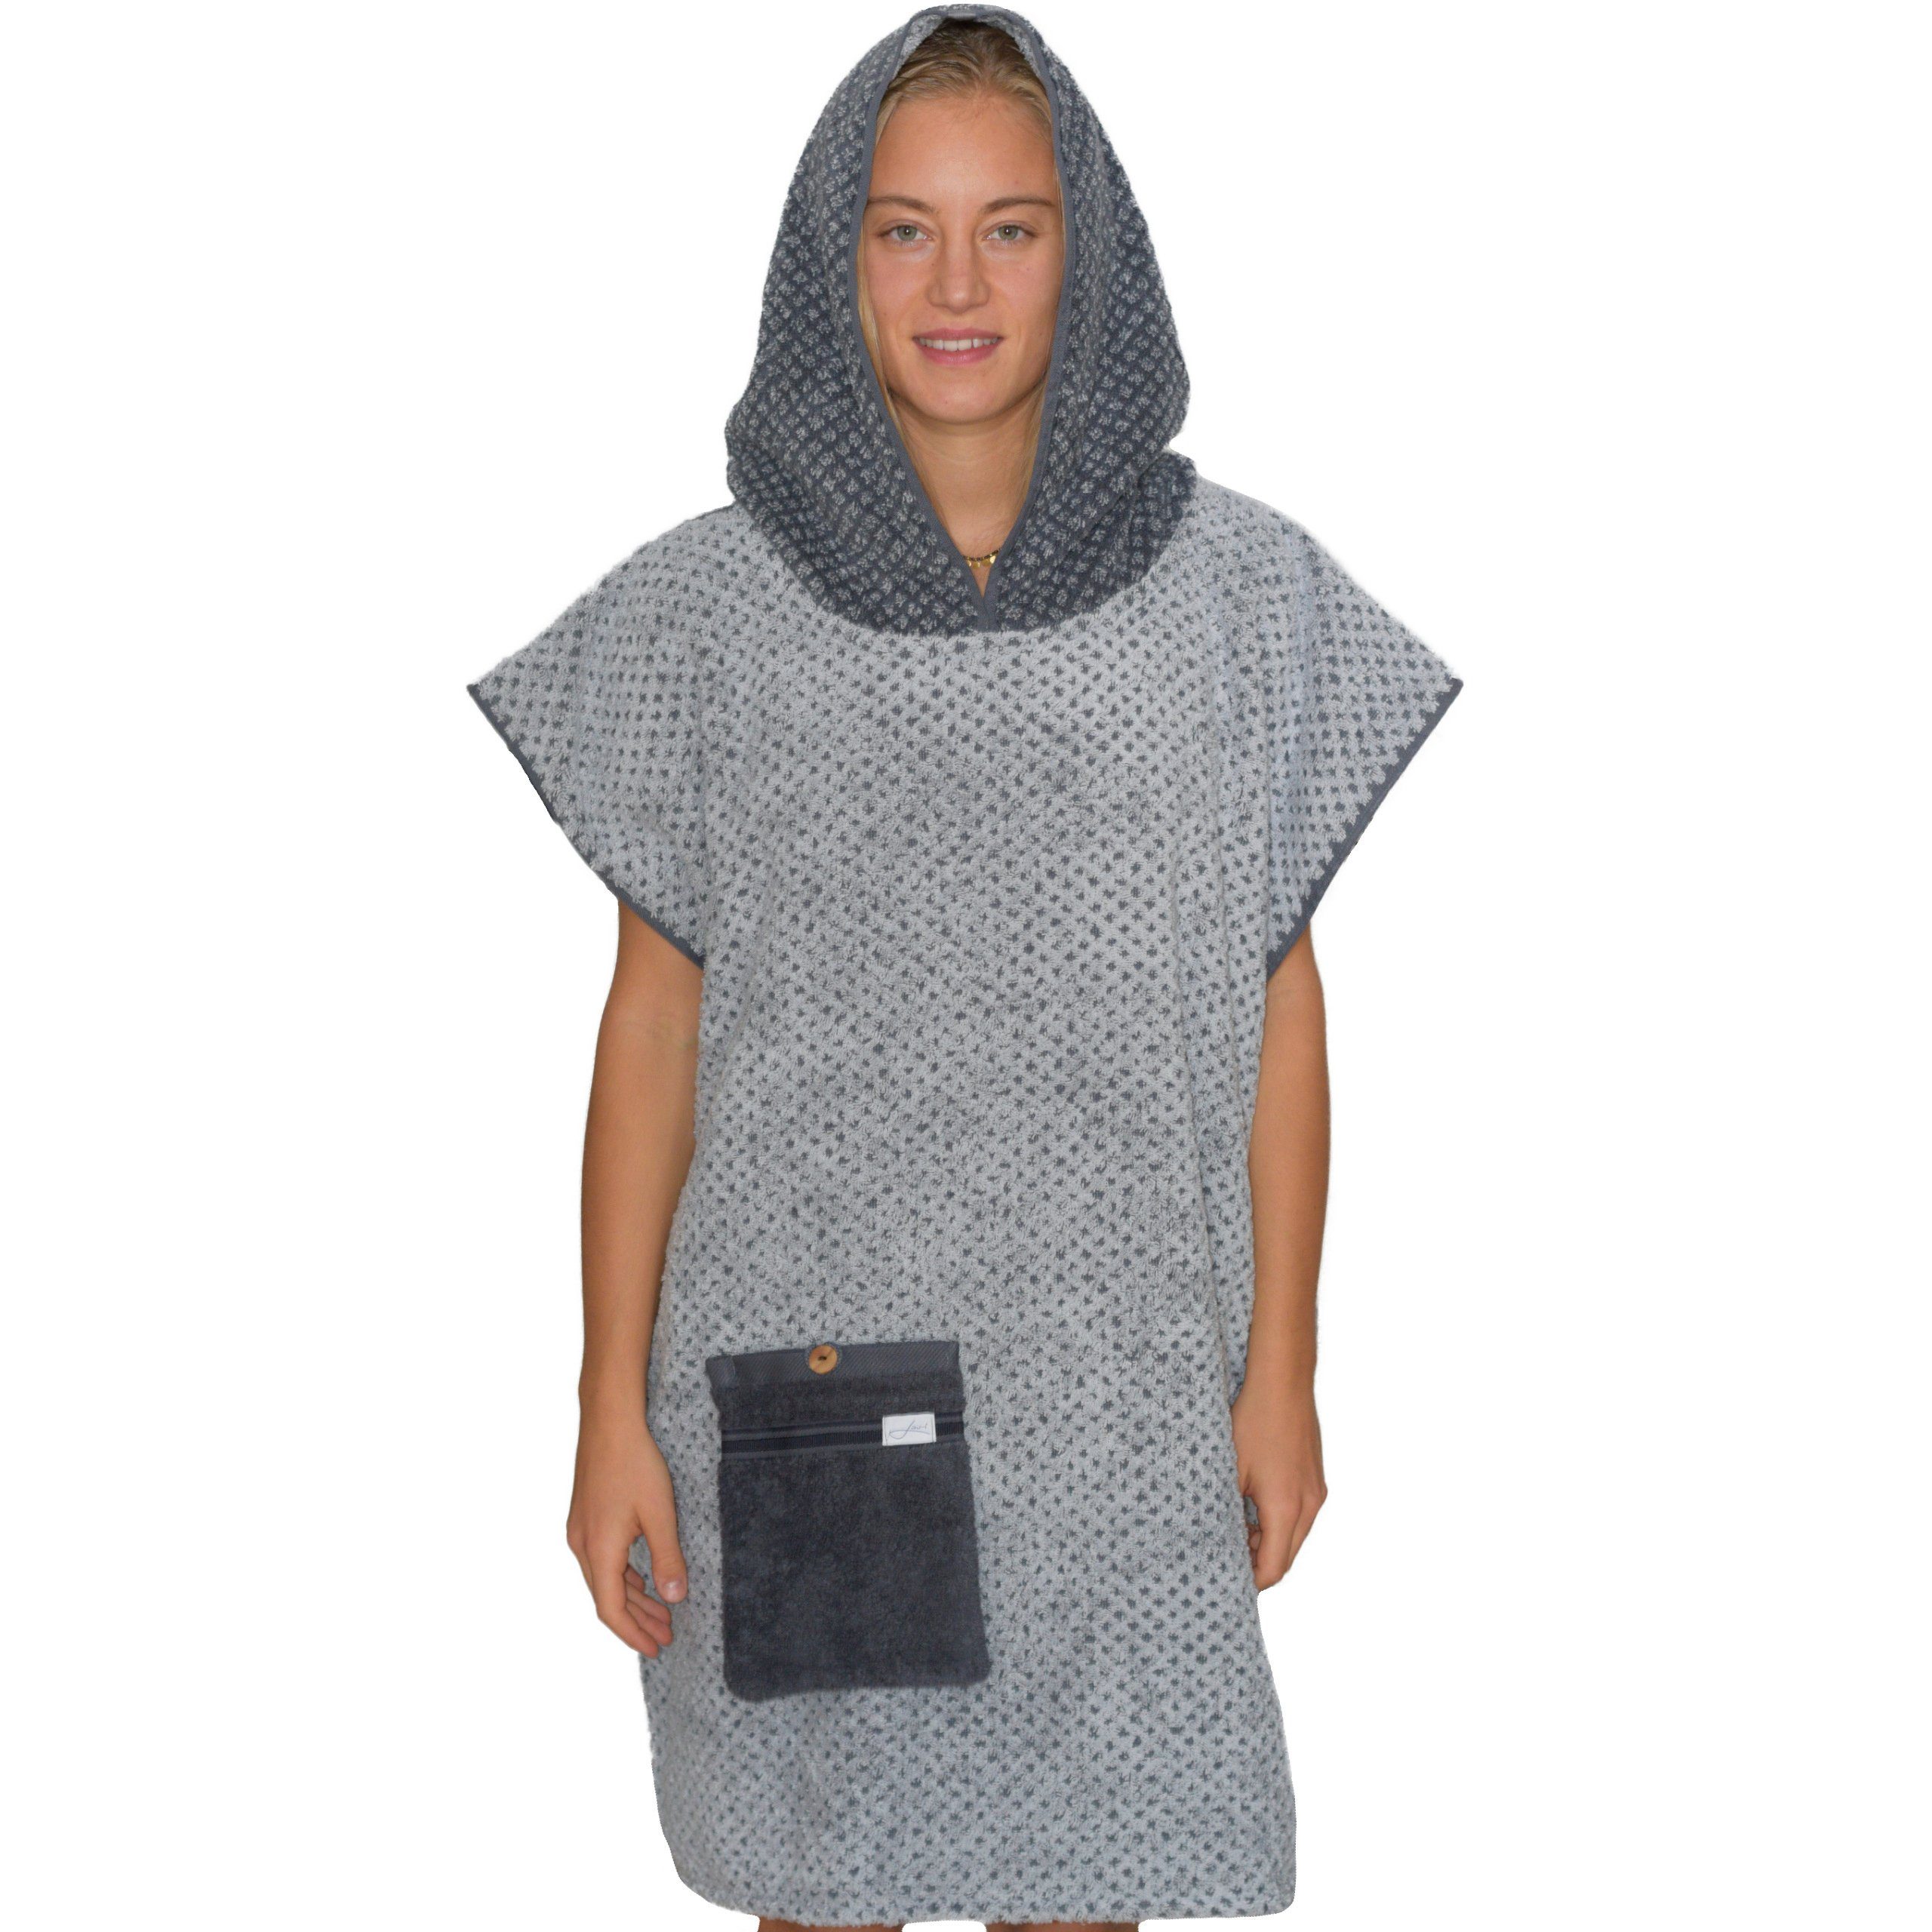 Lou-i Badeponcho Surfponcho Frottee Erwachsene Made in Germany Badeumhang, Kapuze, mit Kapuze und Tasche